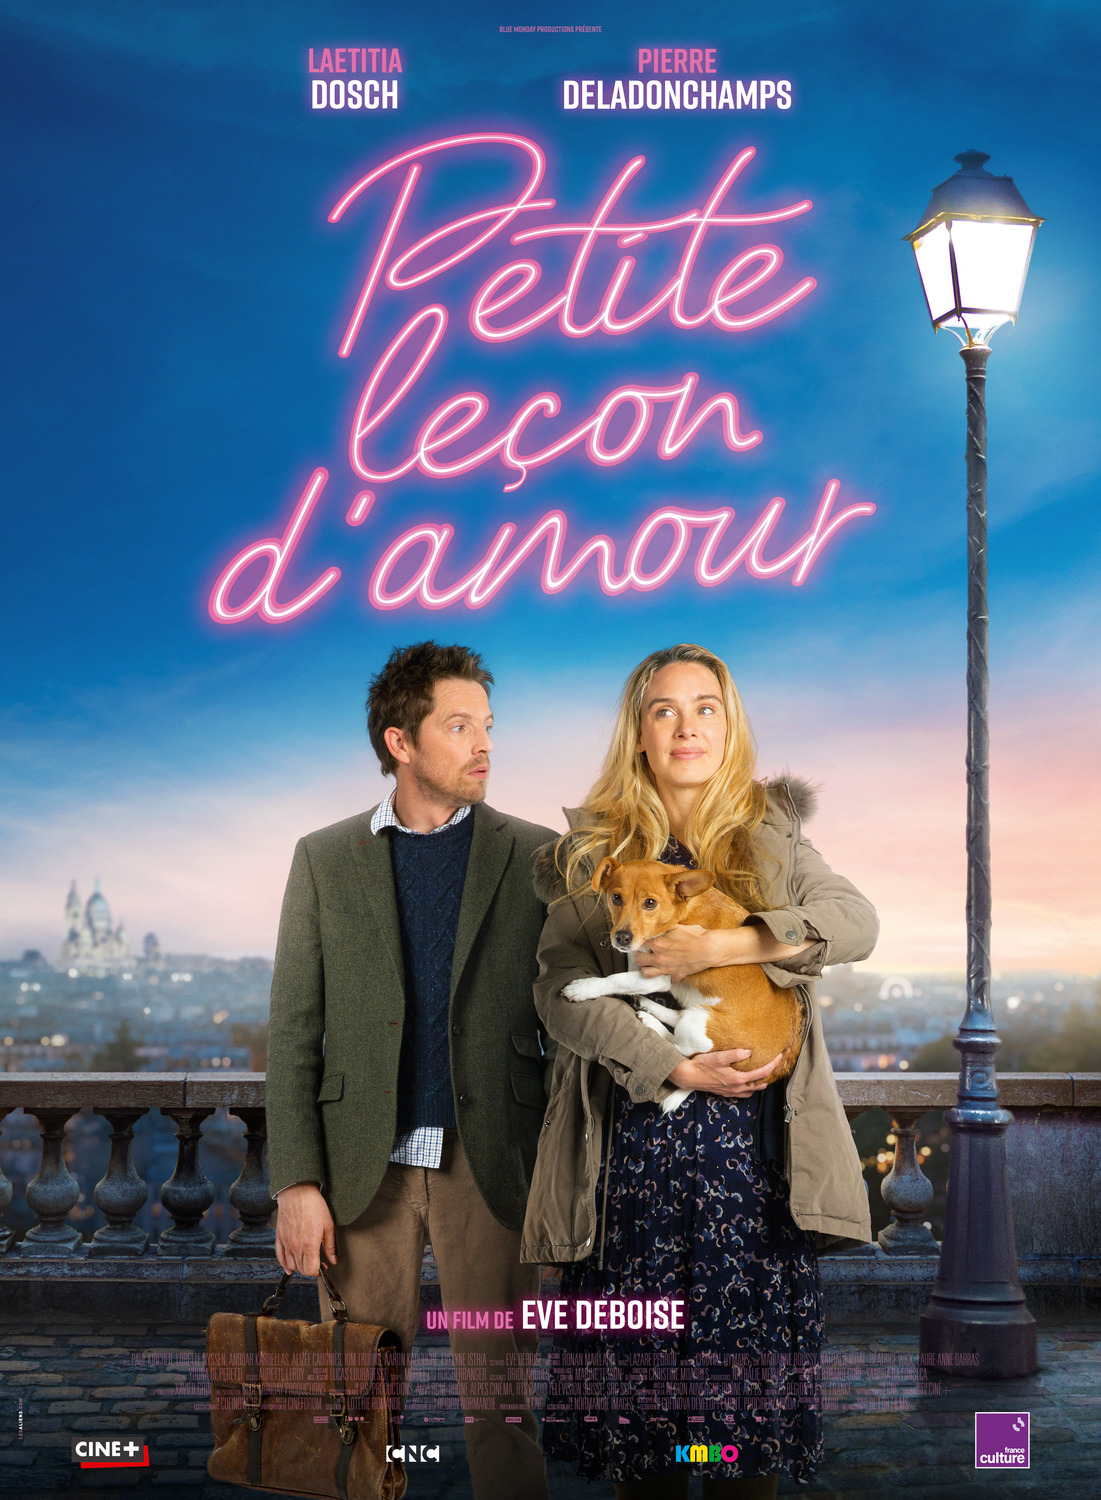 Extra Large Movie Poster Image for Petite leçon d'amour 